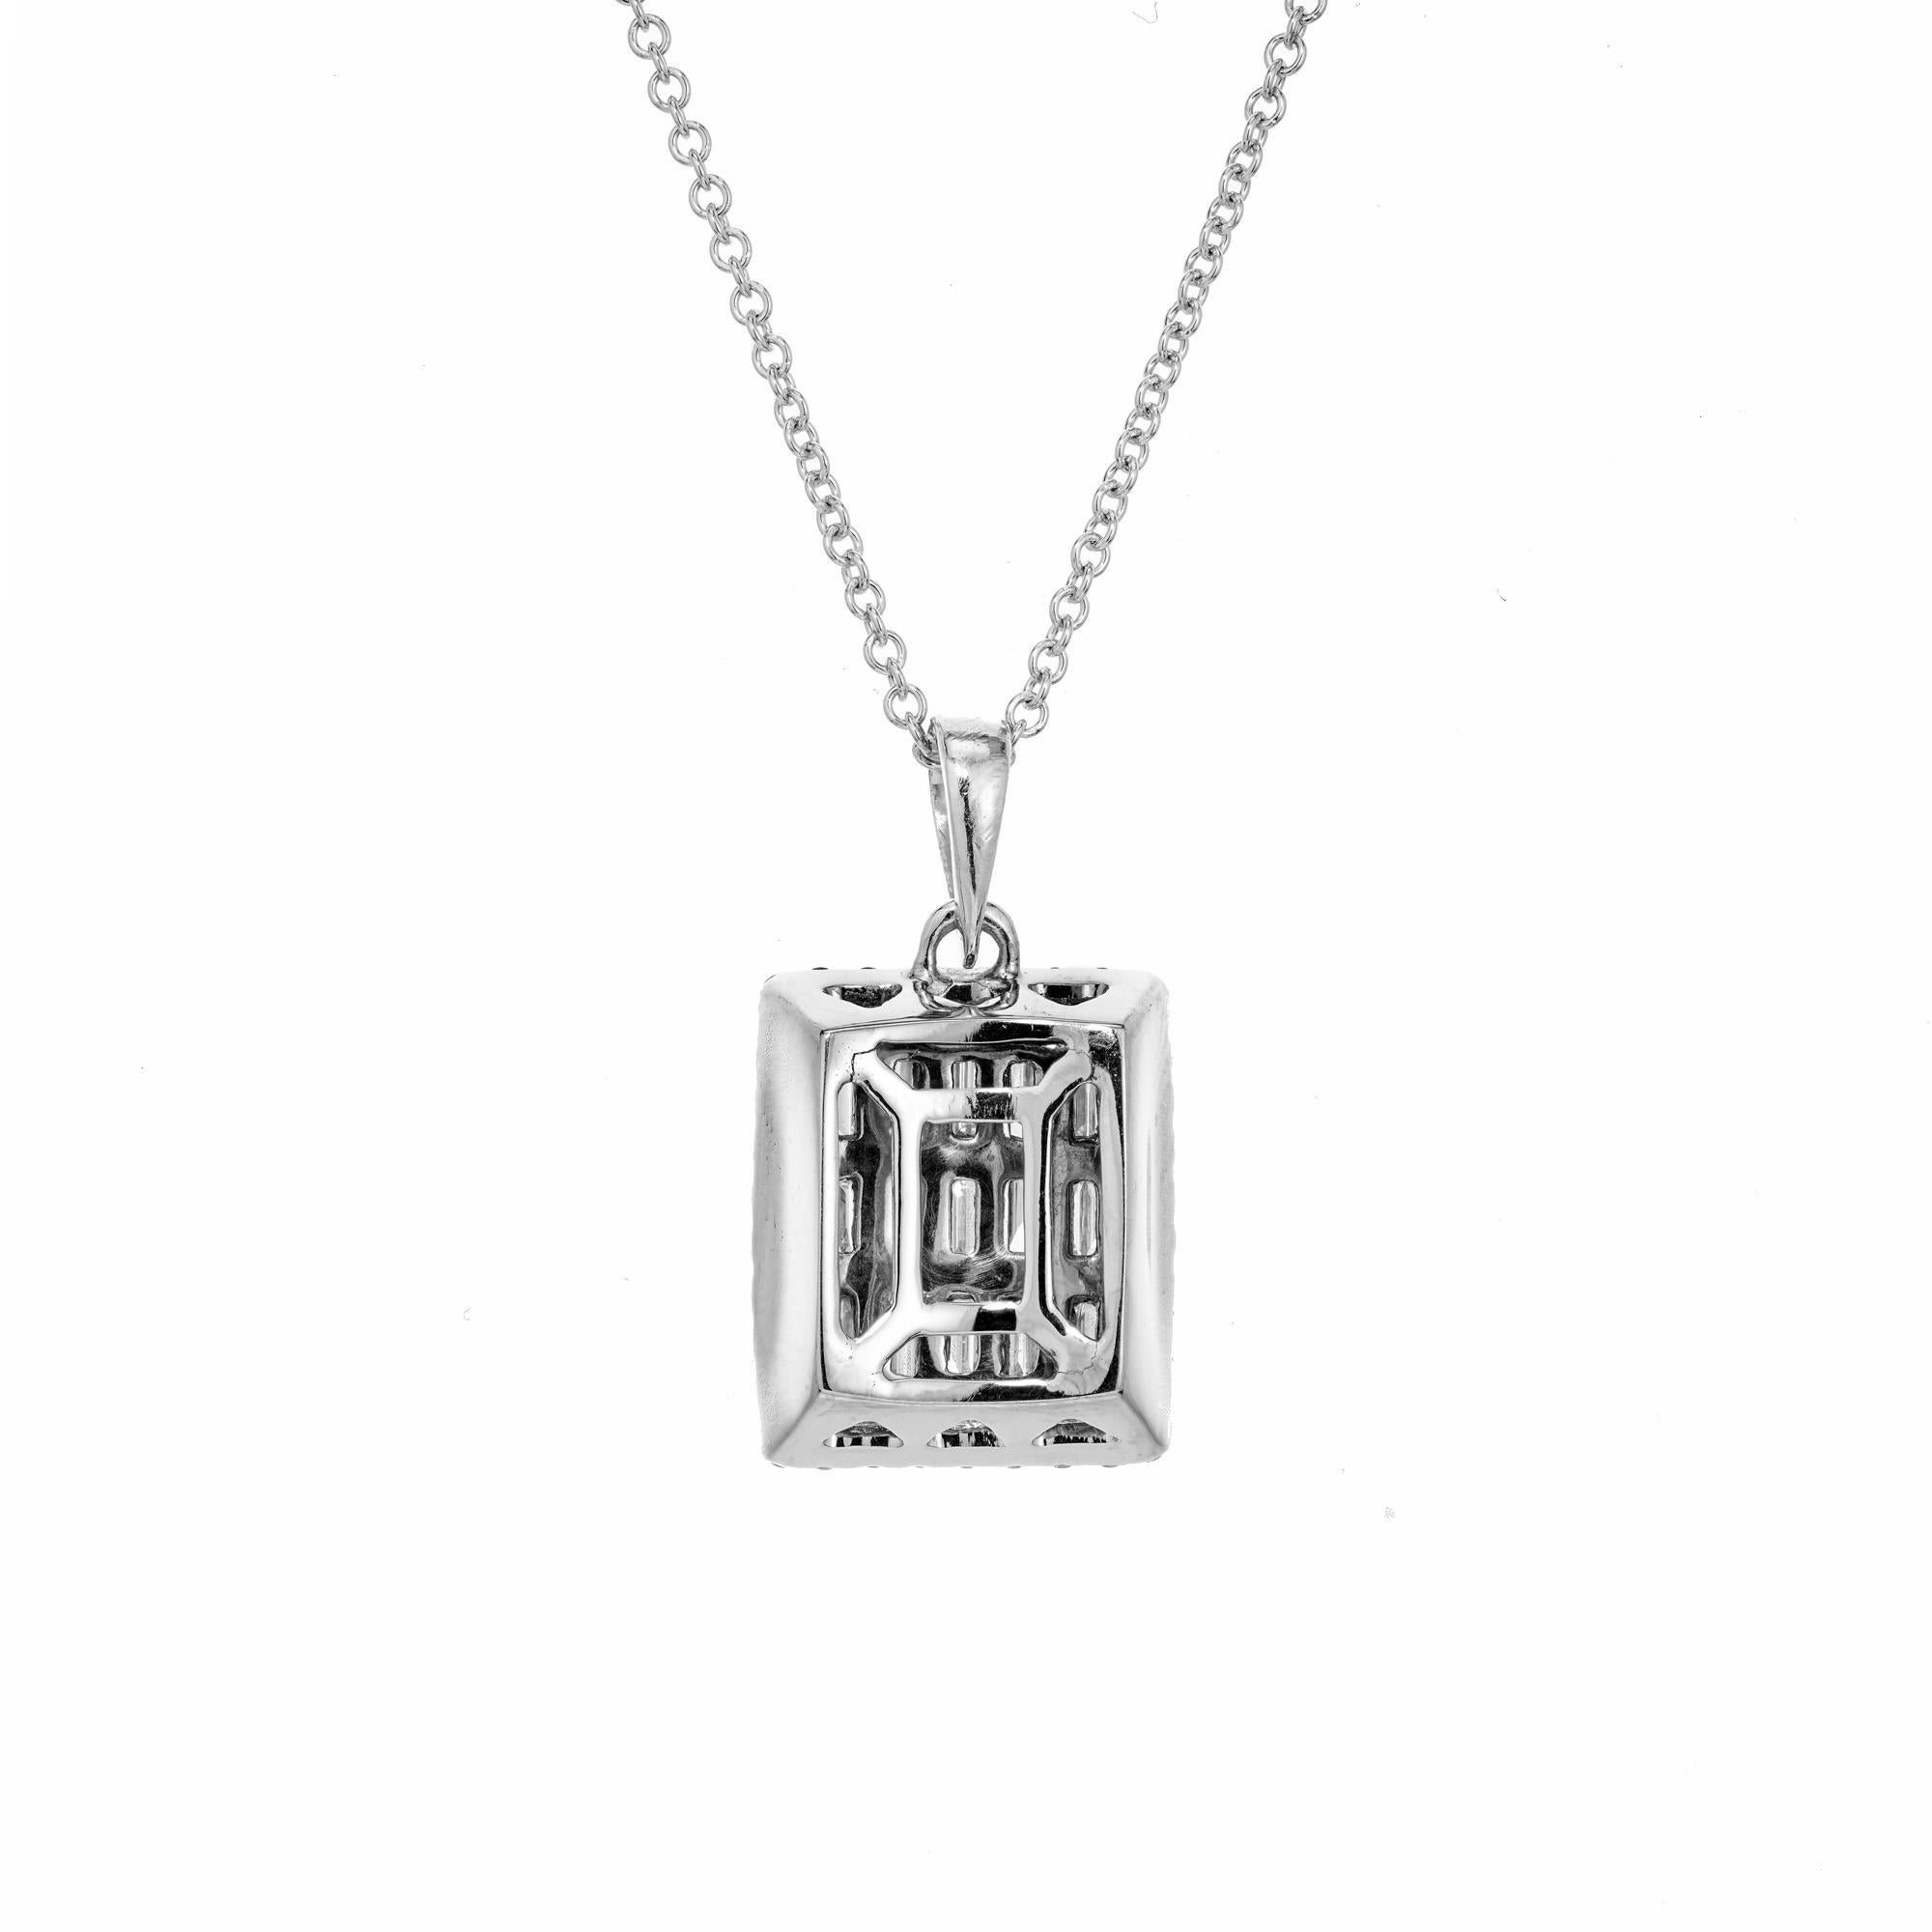 1.36 Carat Diamond White Gold Rectangular Modern Pendant Necklace In Good Condition For Sale In Stamford, CT